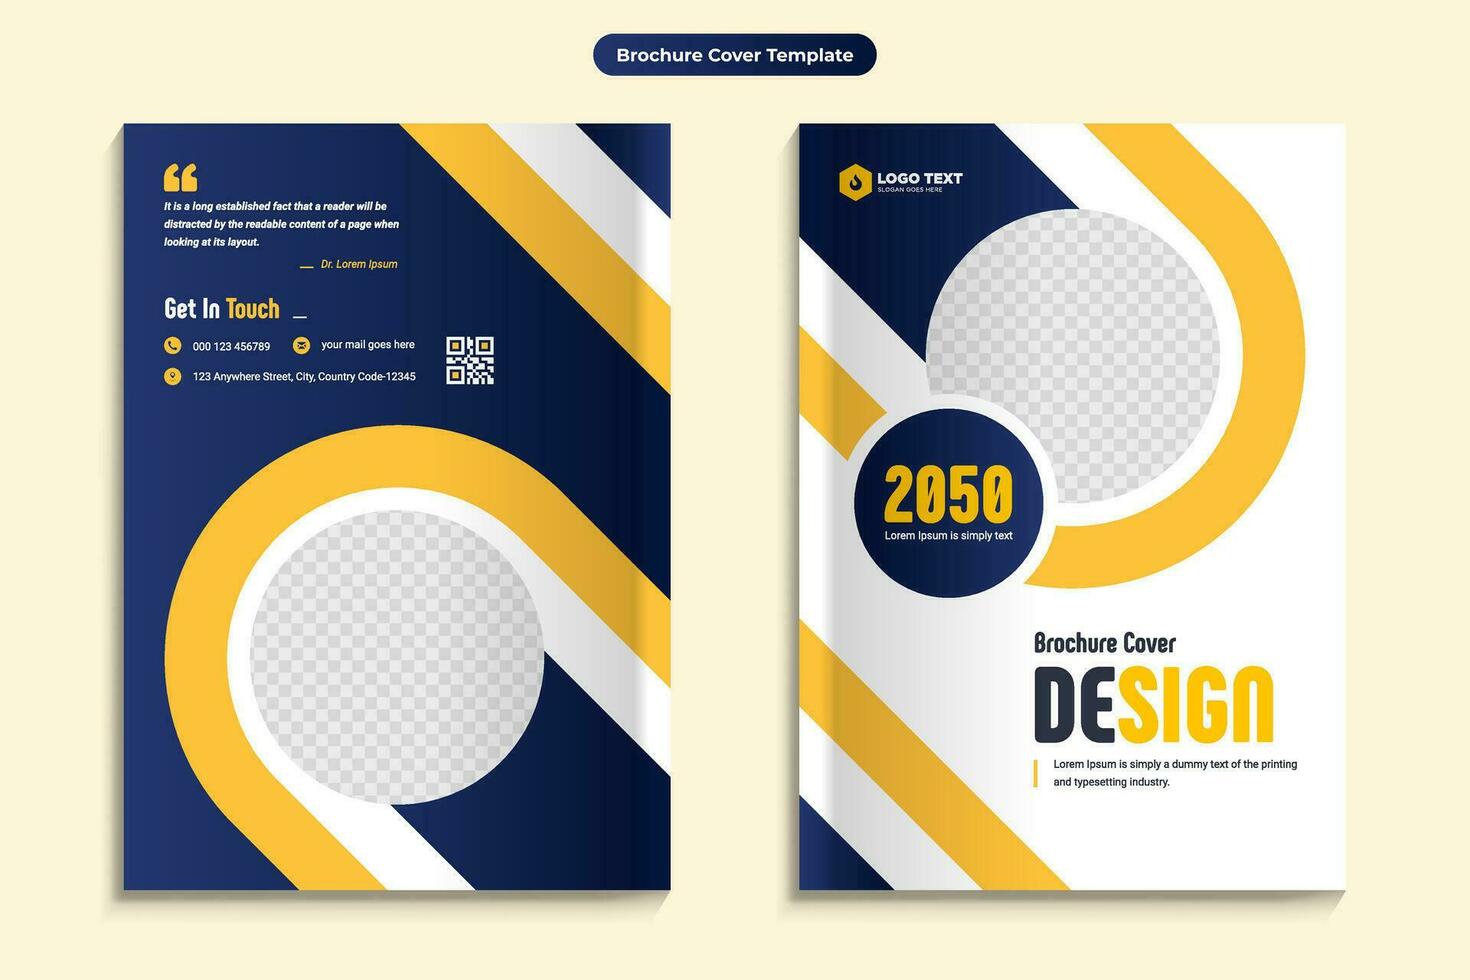 Creative Corporate Business Brochure Book Cover Design Template in A4. Can be adapted to Brochures, Annual Reports, magazines, posters, Business presentations, portfolios, flyers vector